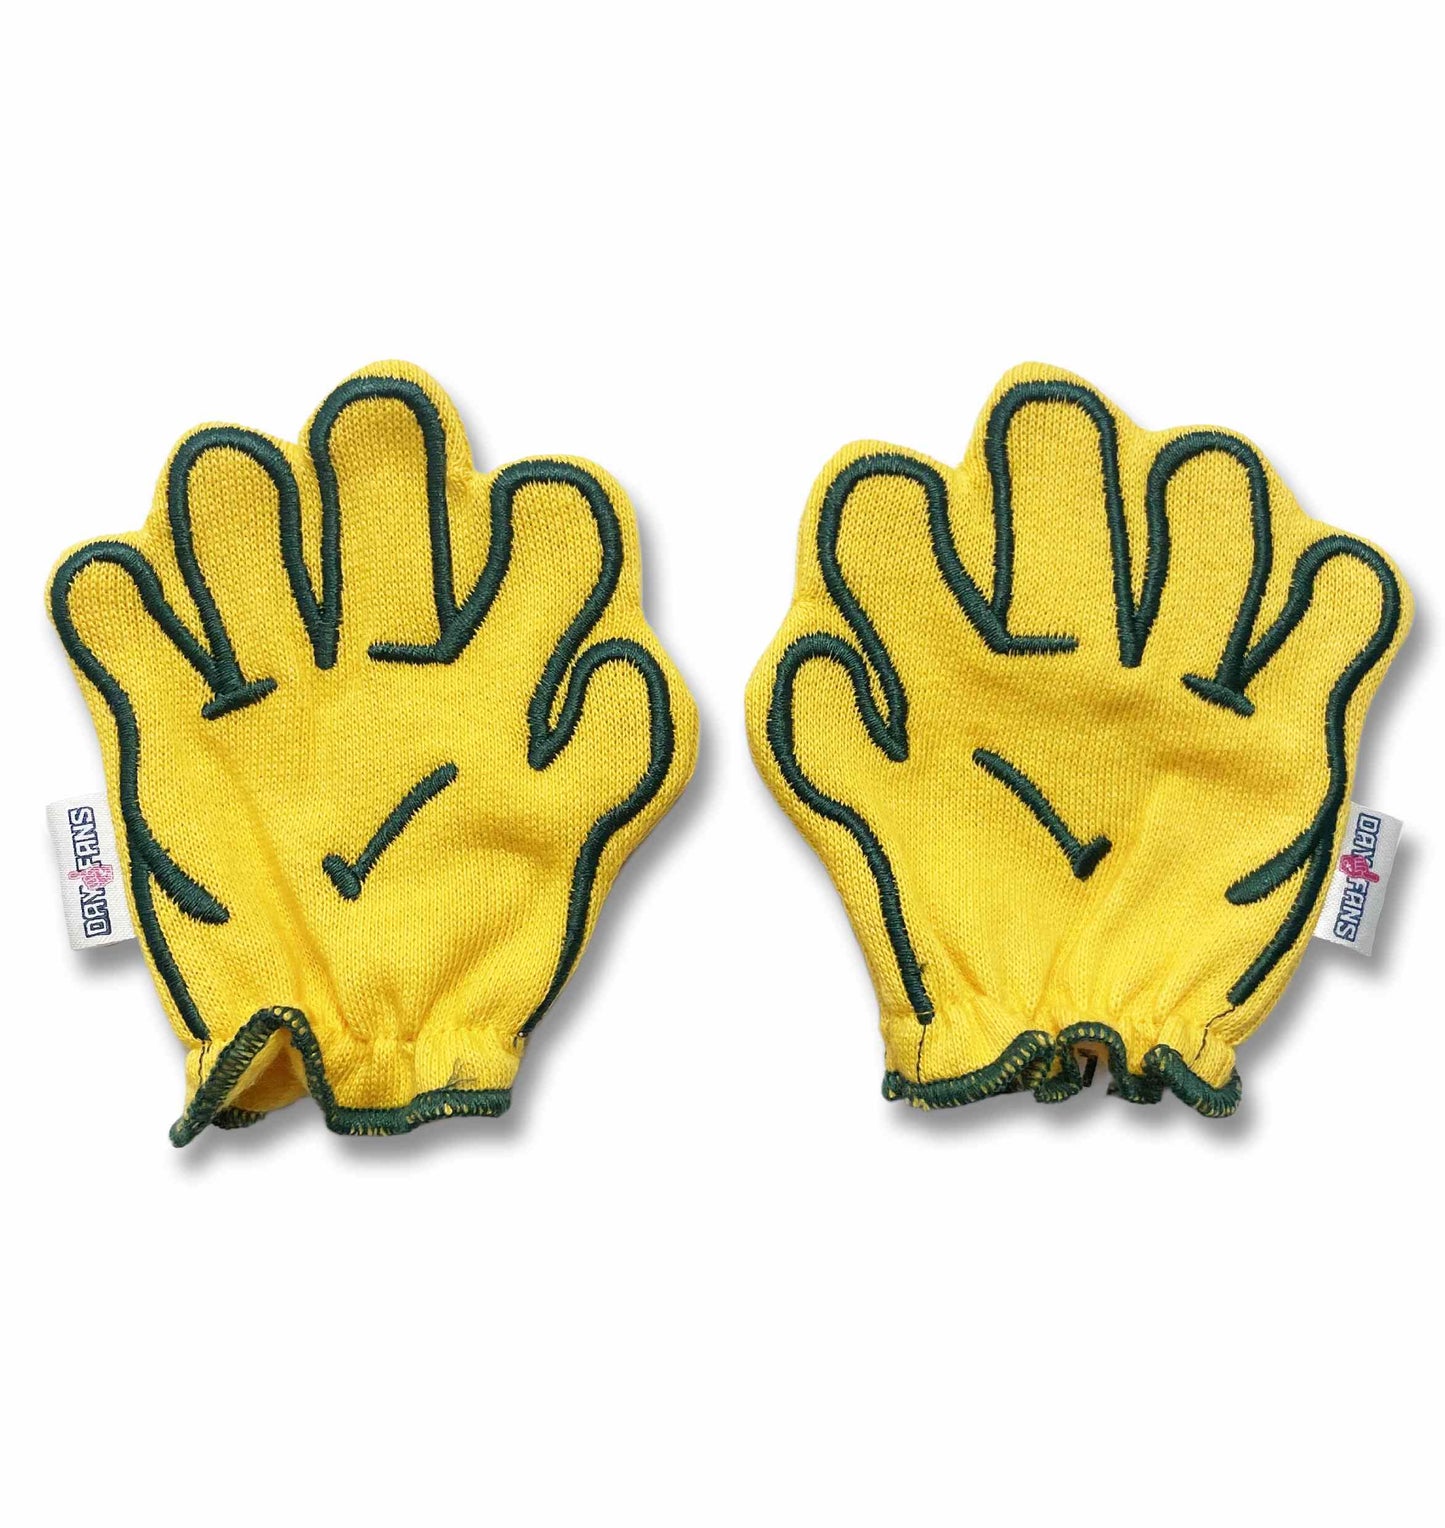 Baylor Sic Em FanMitts Baby Mittens University Yellow Front Pair